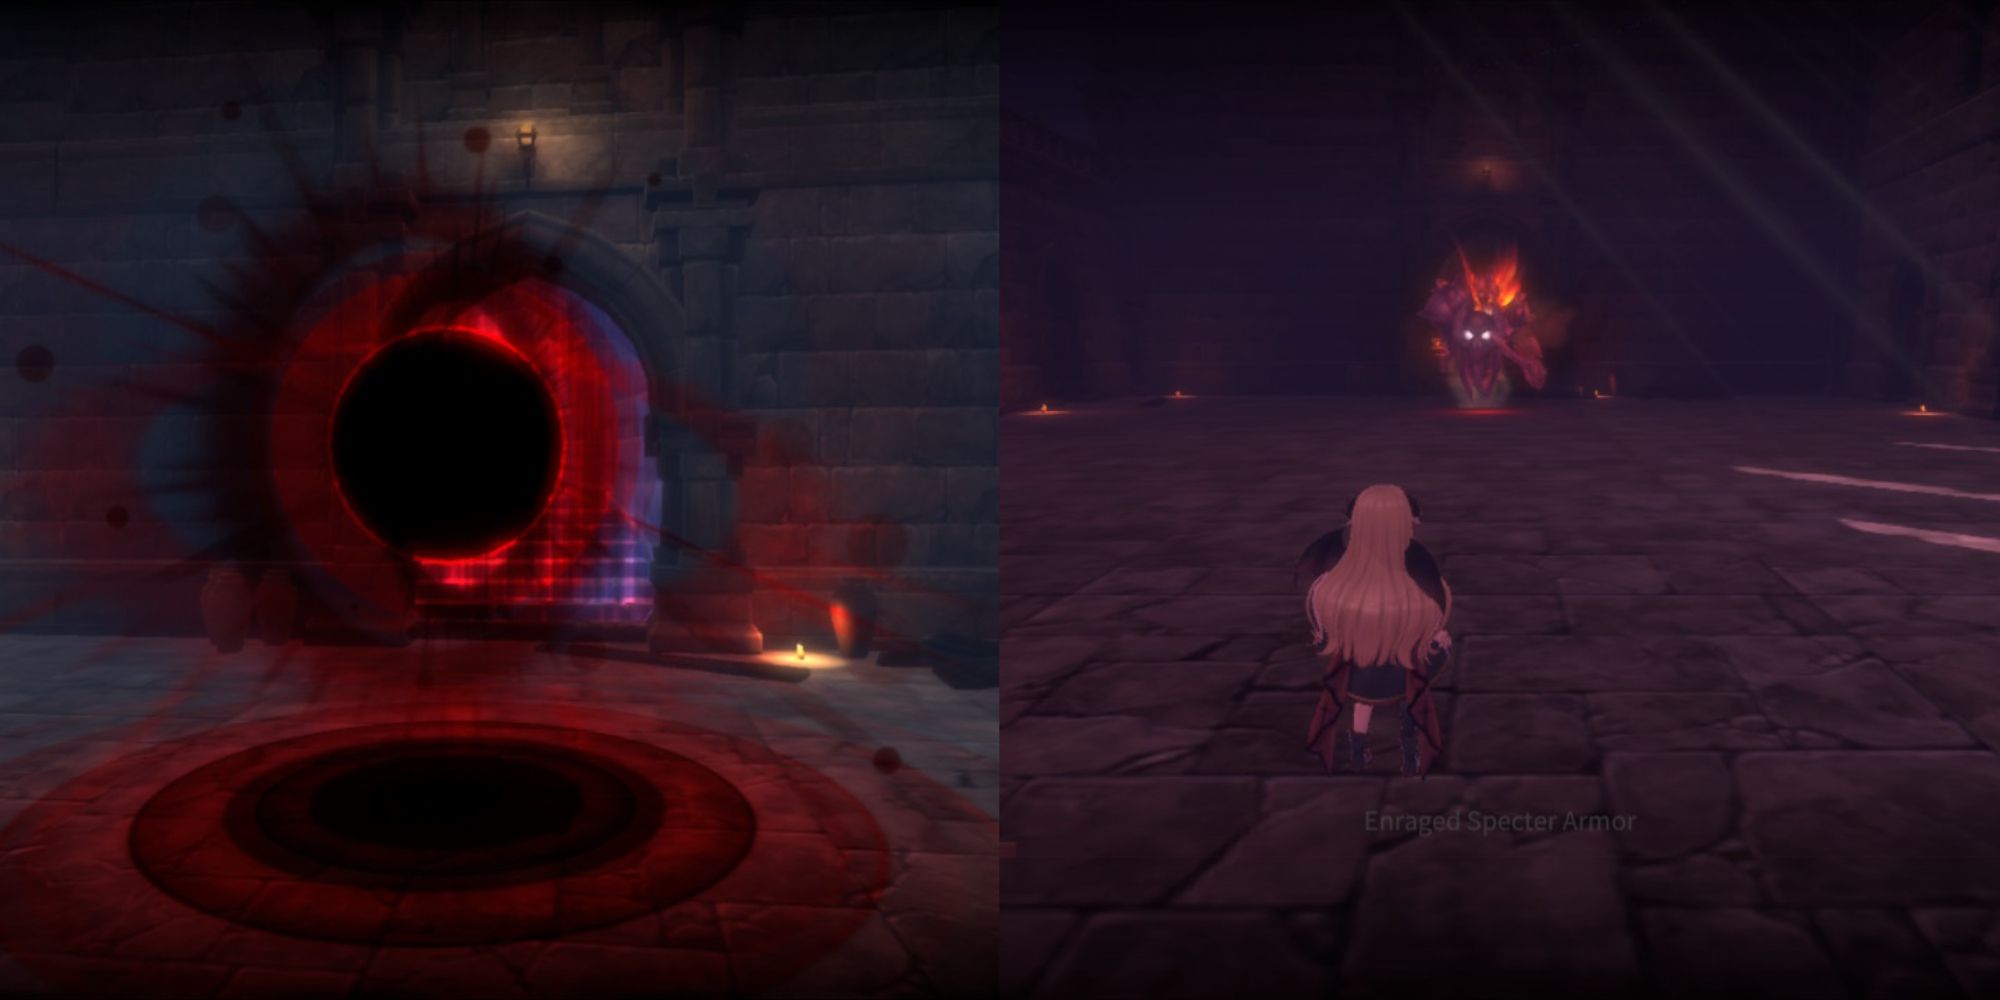 A collage of the portal the Enraged Specter Armor teleports from along with it standing aginst Nobeta in Little Witch Nobeta.